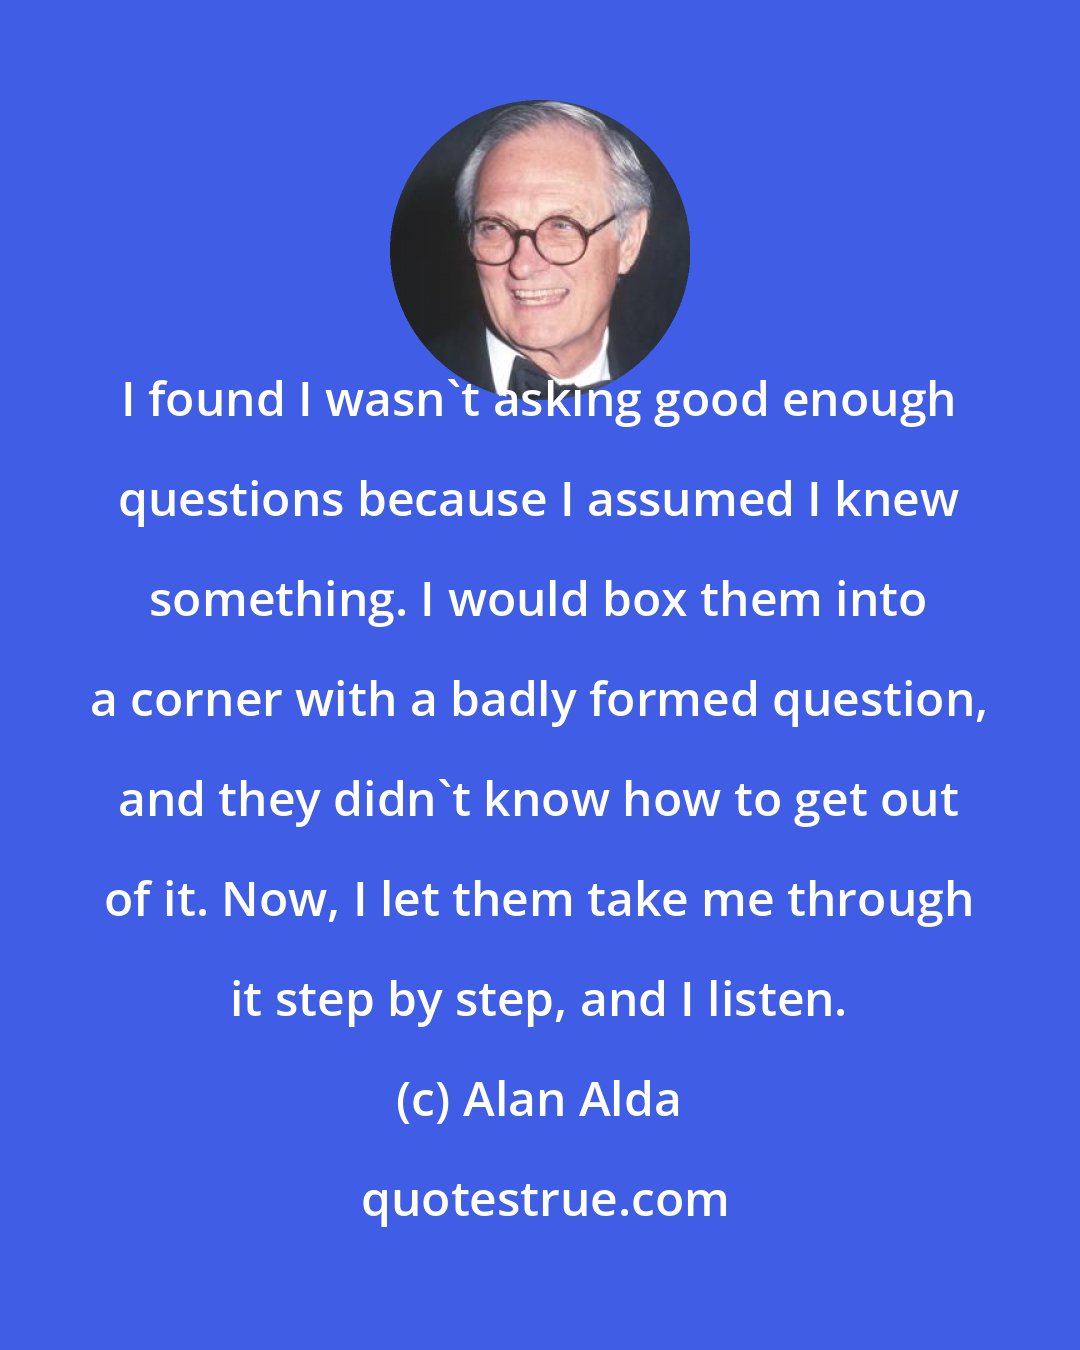 Alan Alda: I found I wasn't asking good enough questions because I assumed I knew something. I would box them into a corner with a badly formed question, and they didn't know how to get out of it. Now, I let them take me through it step by step, and I listen.